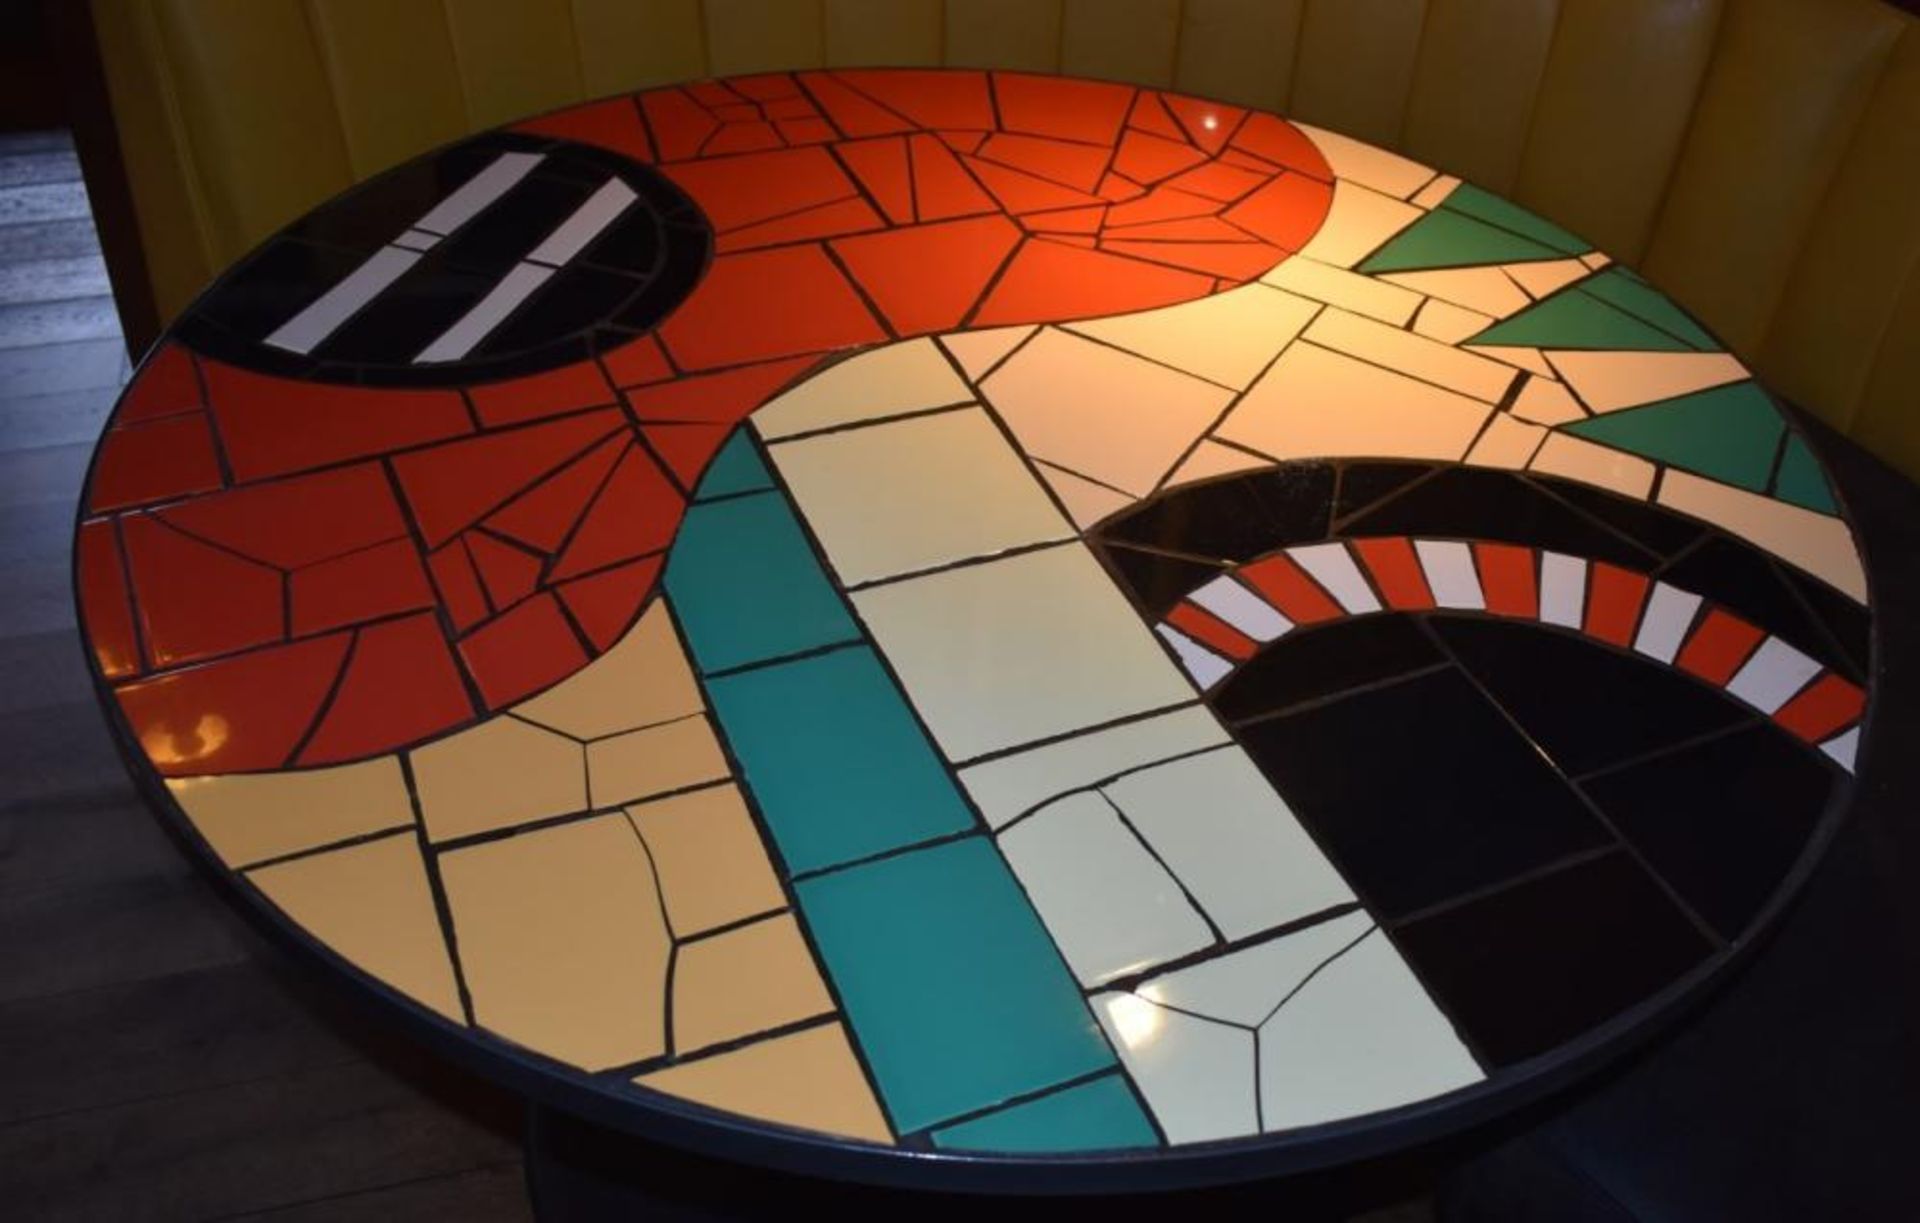 1 x Bespoke Mosaic Dining Table - Mexican Guitar and Sun - Round Table With Mosiac Tiled Top and Cas - Image 3 of 4